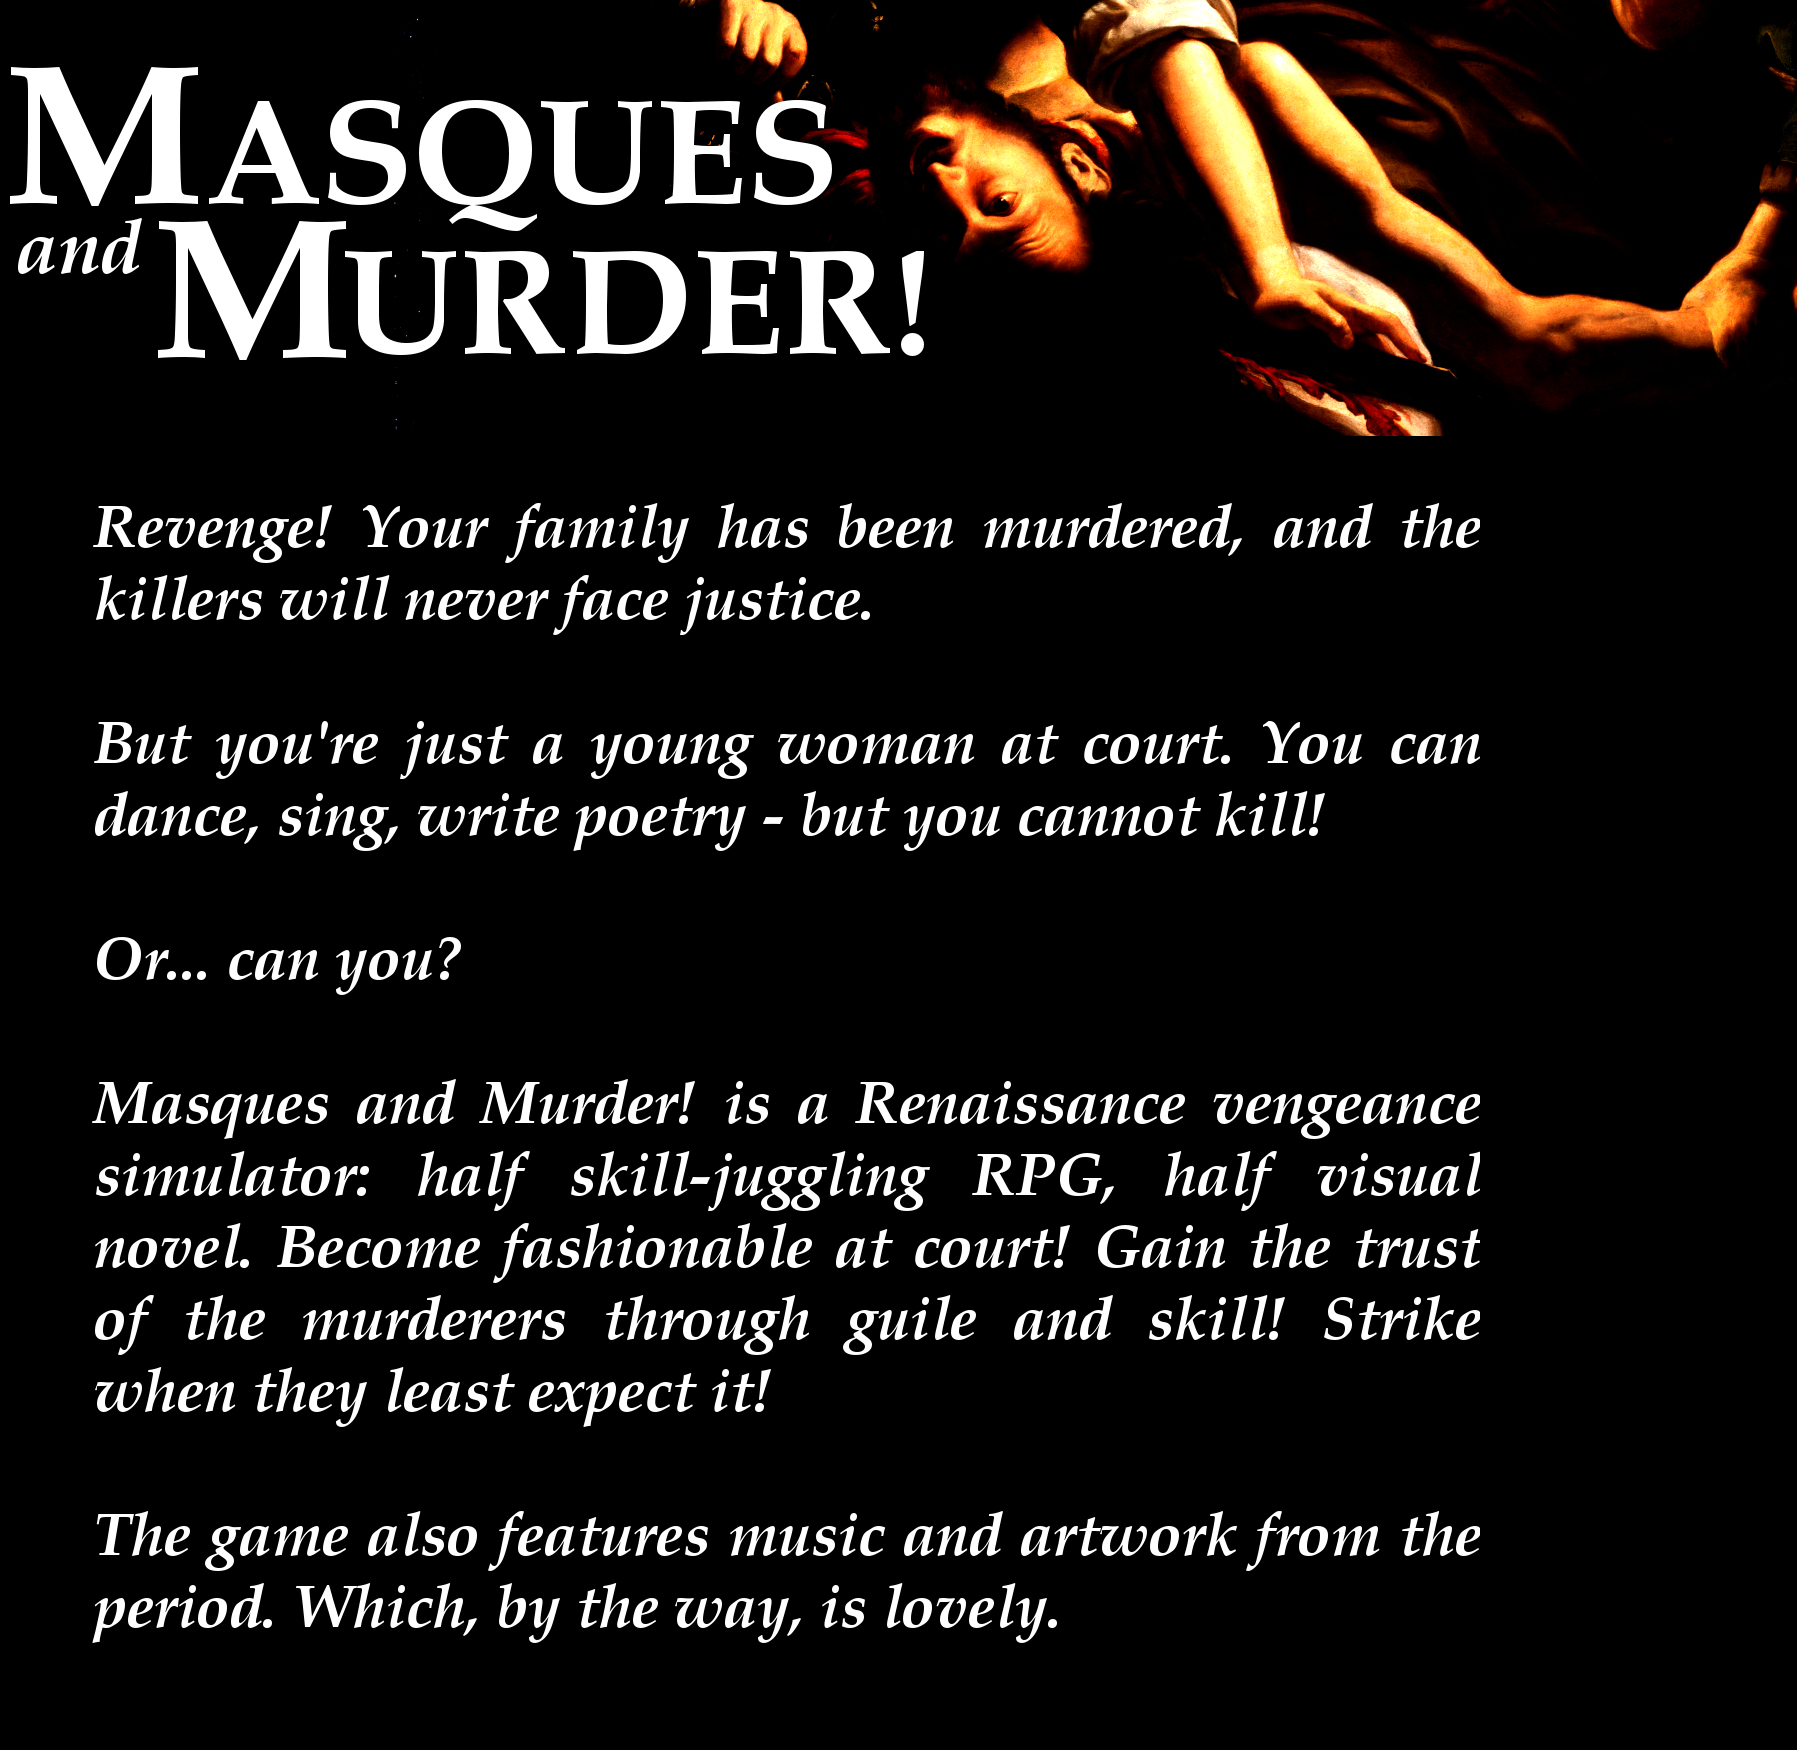 Masques and Murder!